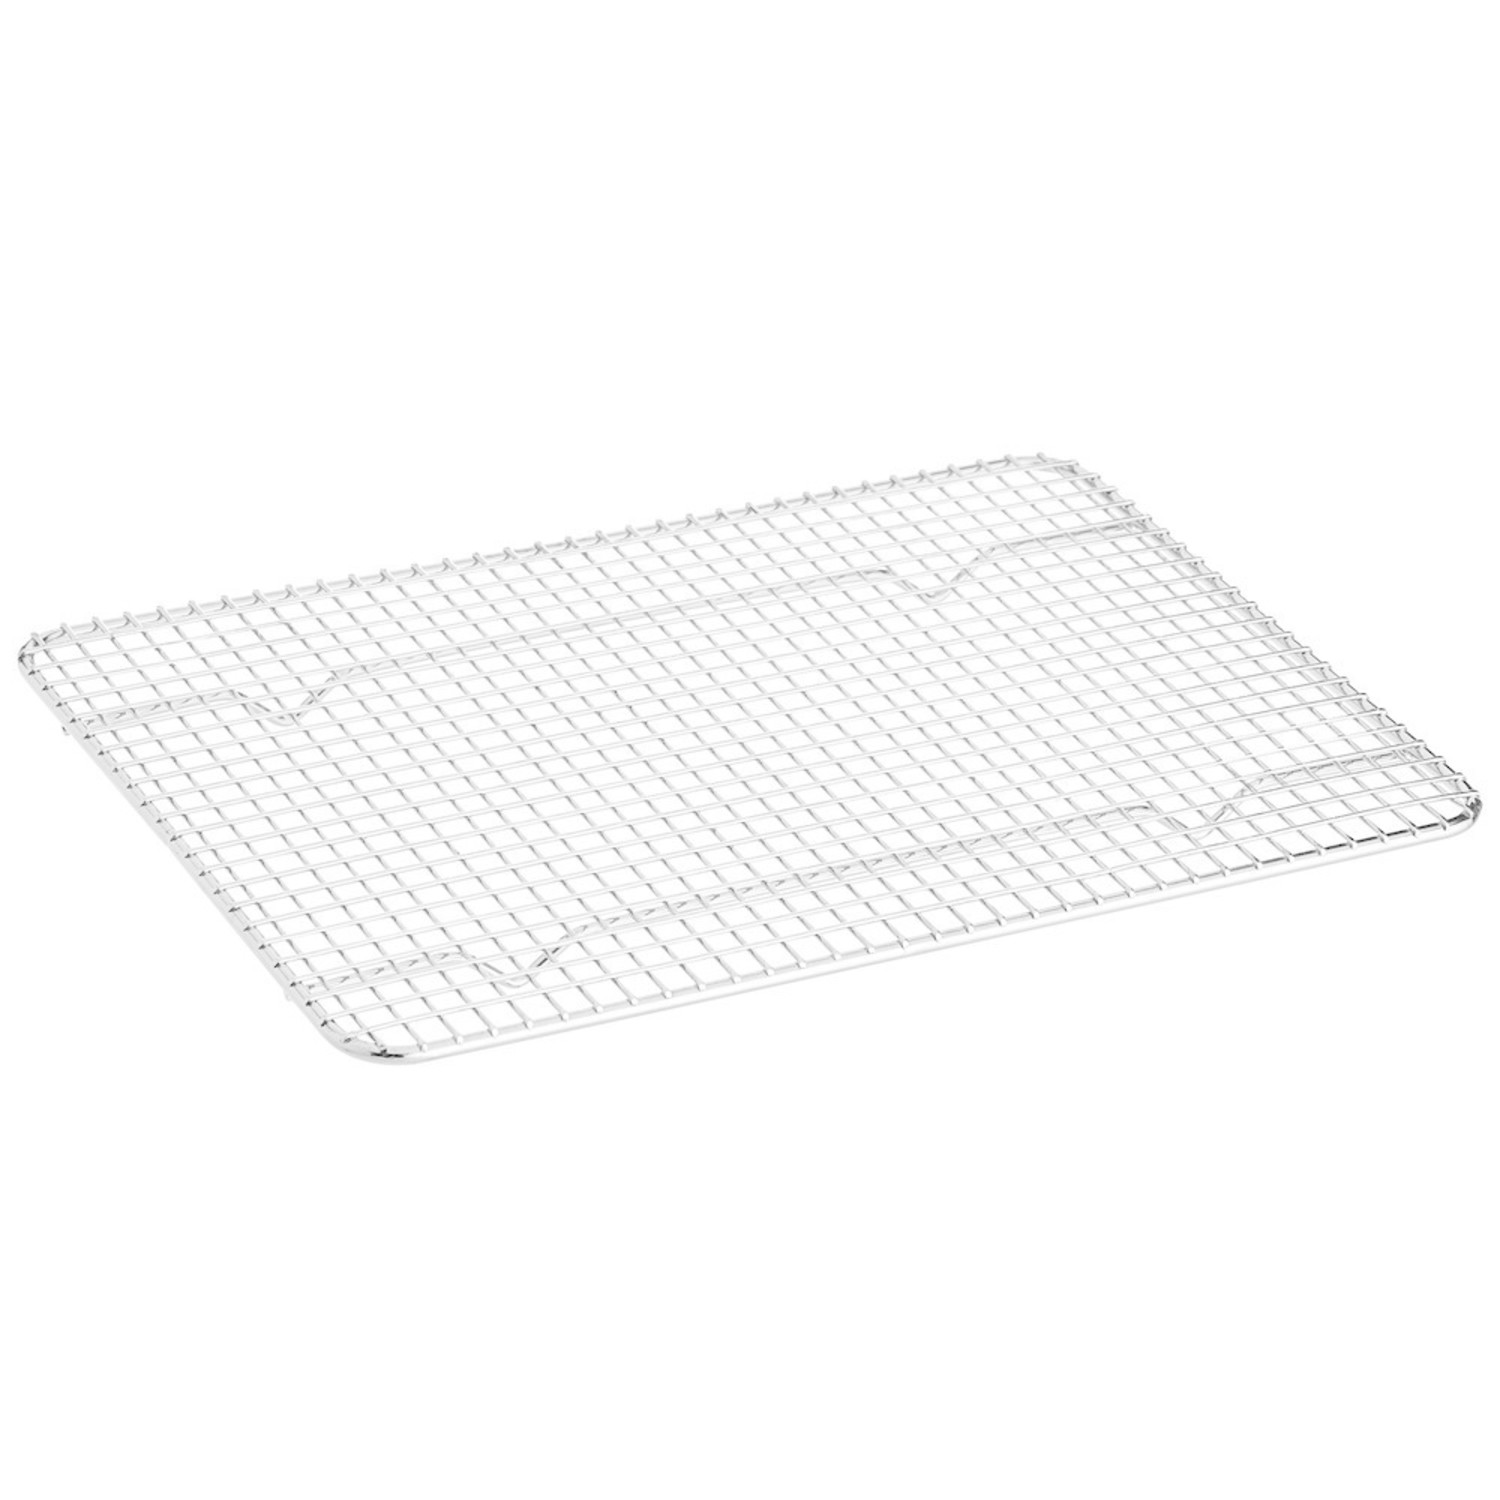 Last Confection 8-1/2 x 12 Stainless Steel Baking & Cooling Rack (Fits Quarter Sheet Pan)